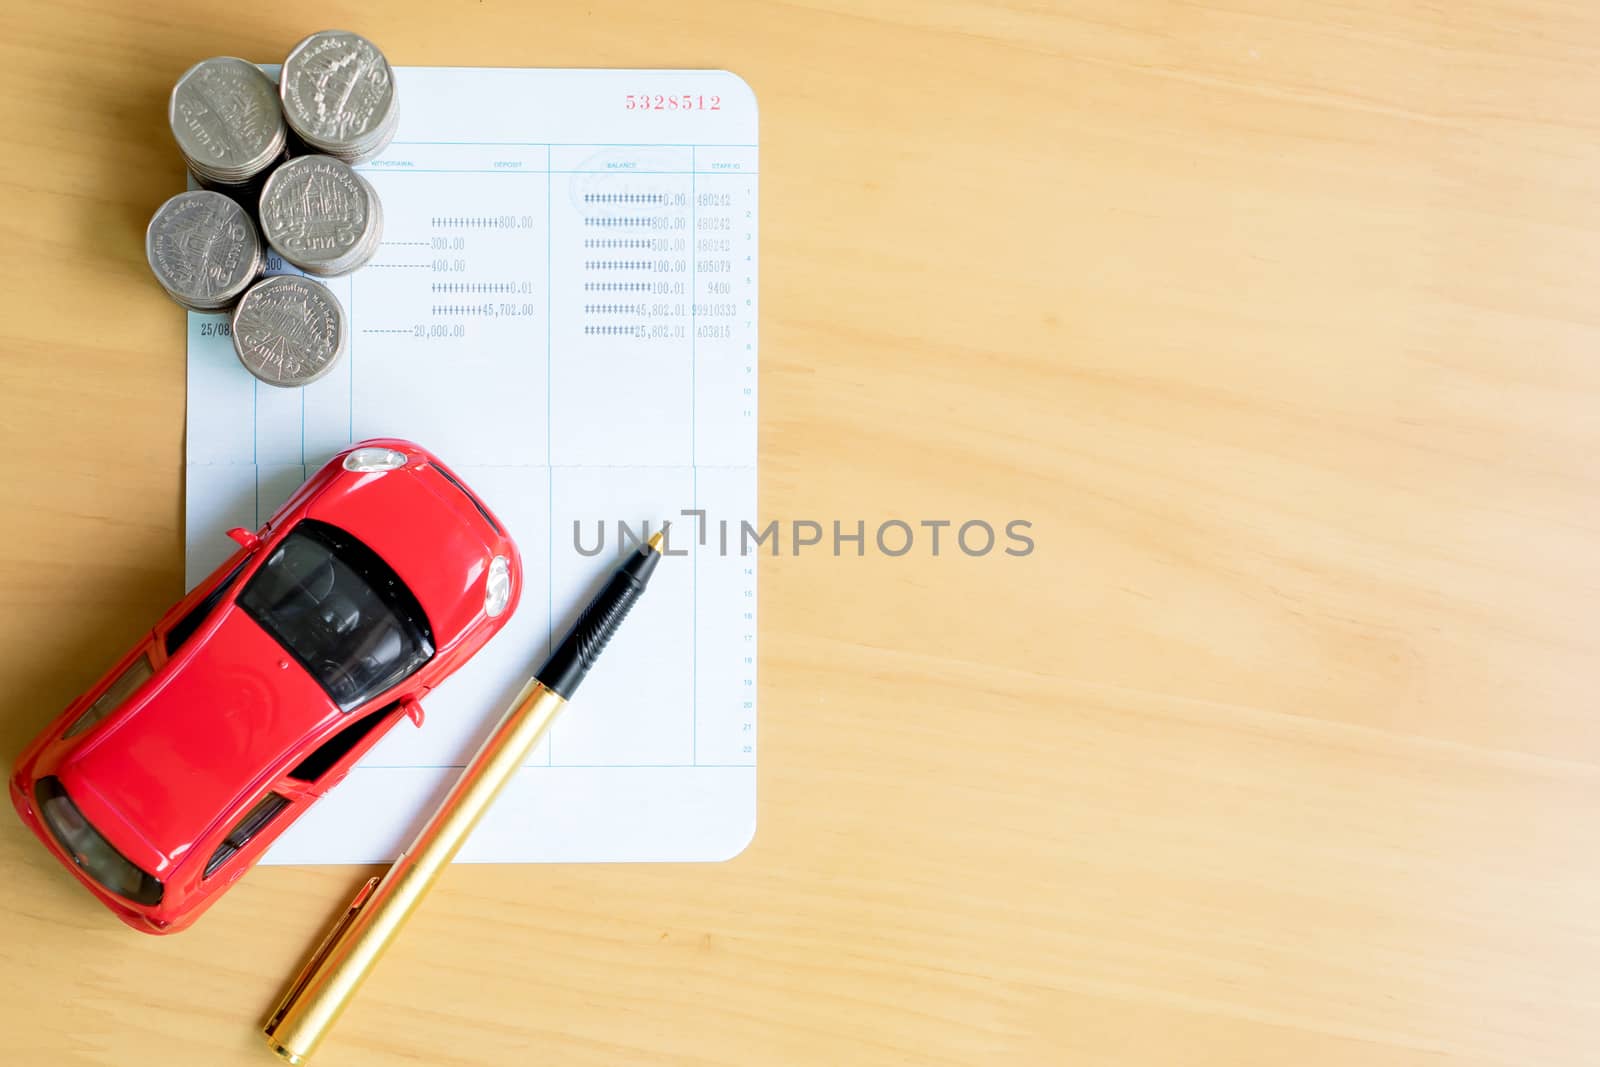 Coins stack in columns, saving book, car. Finance and banking concept.